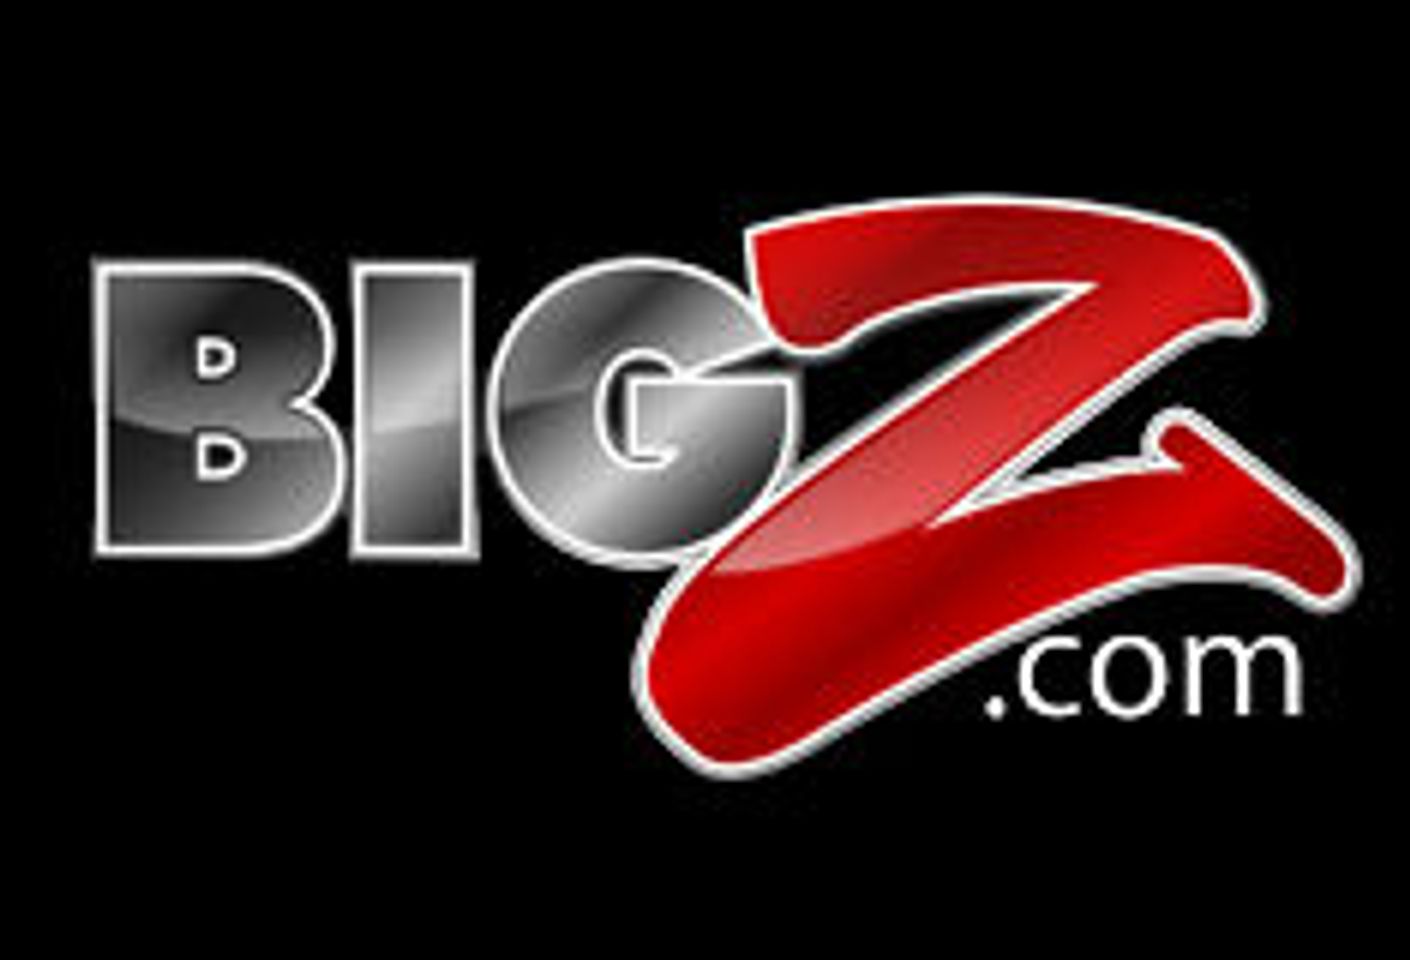 BigZ.com Offers16 Popular Paysites for Under $1 a Day